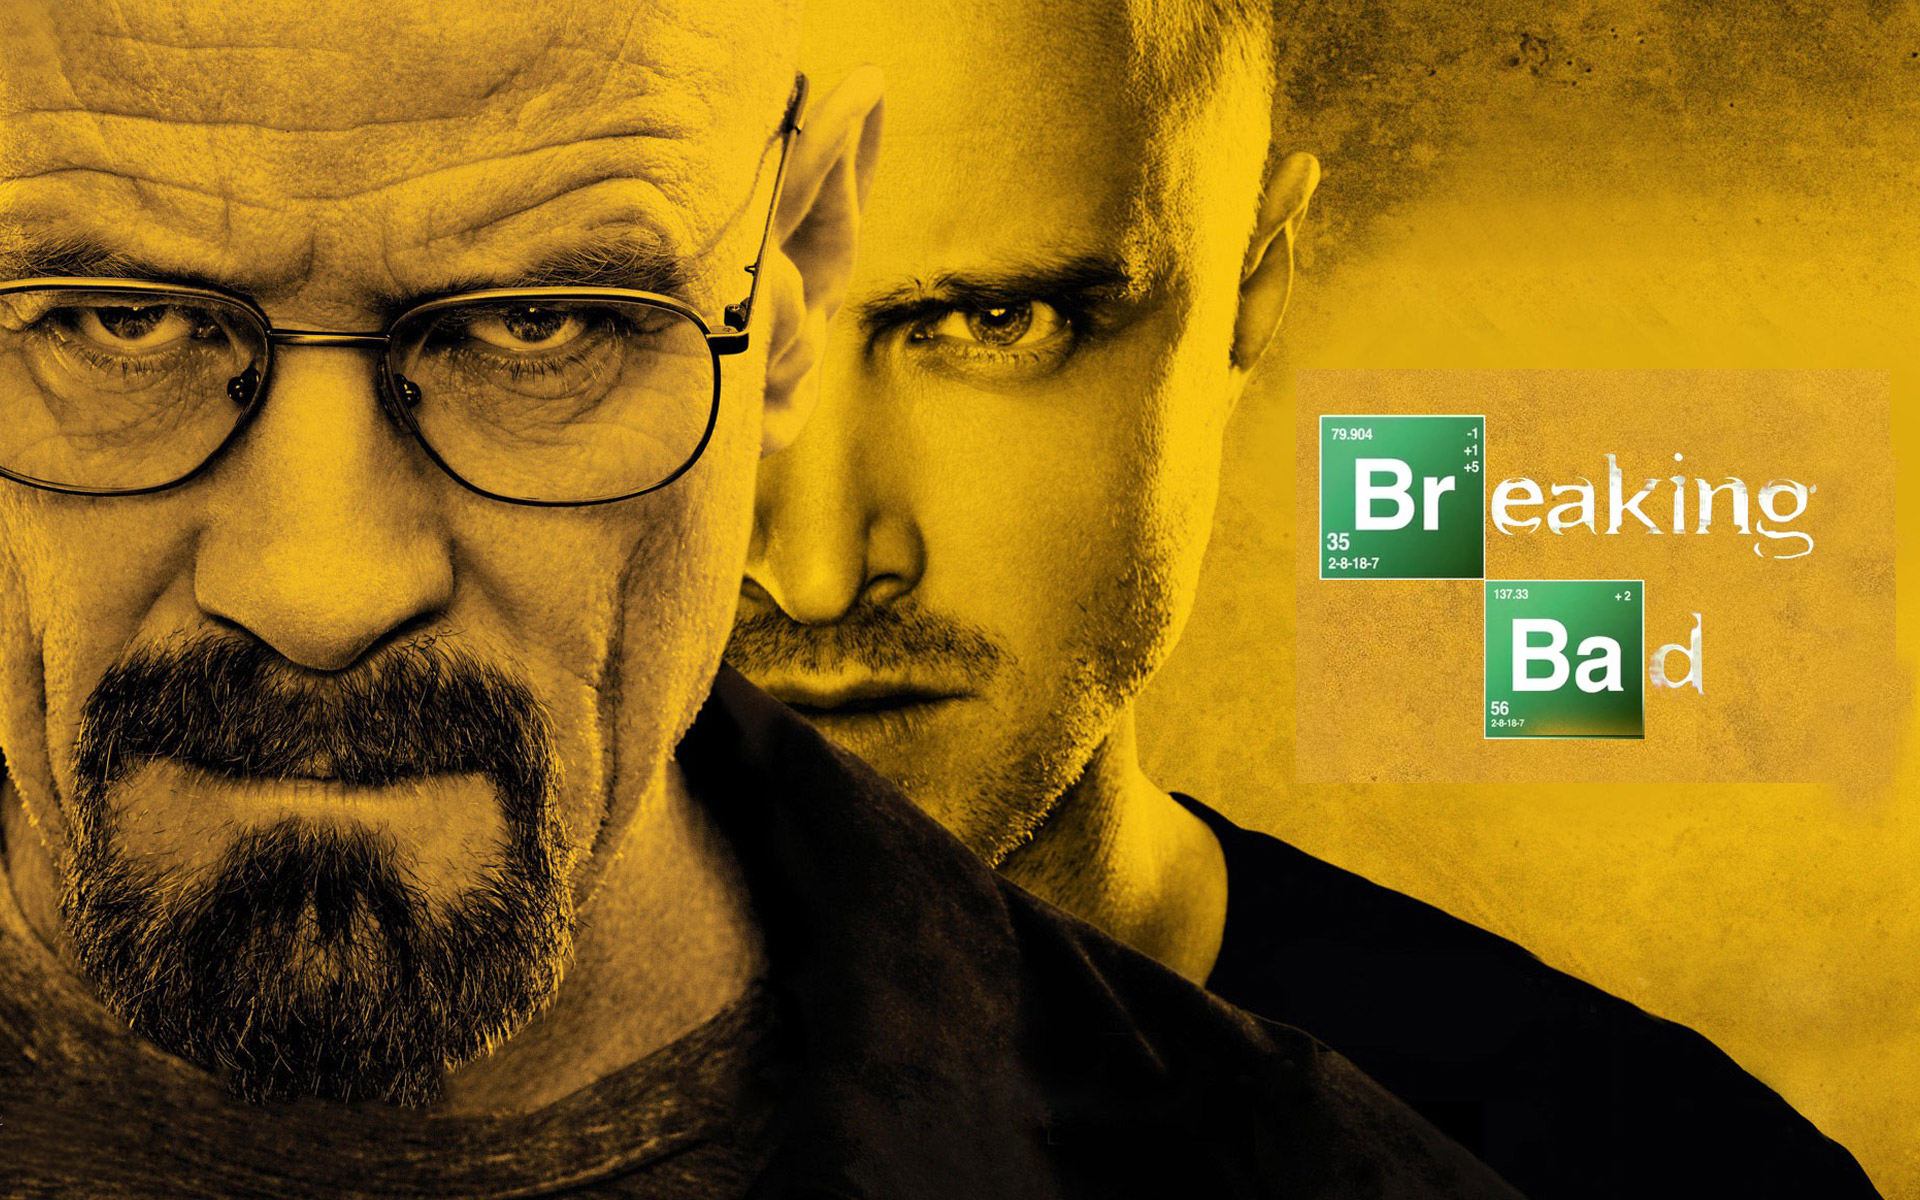 Breaking News The Untold Story and Latest Buzz on Breaking Bad's Potential Season 6 - What Fans Need to Know